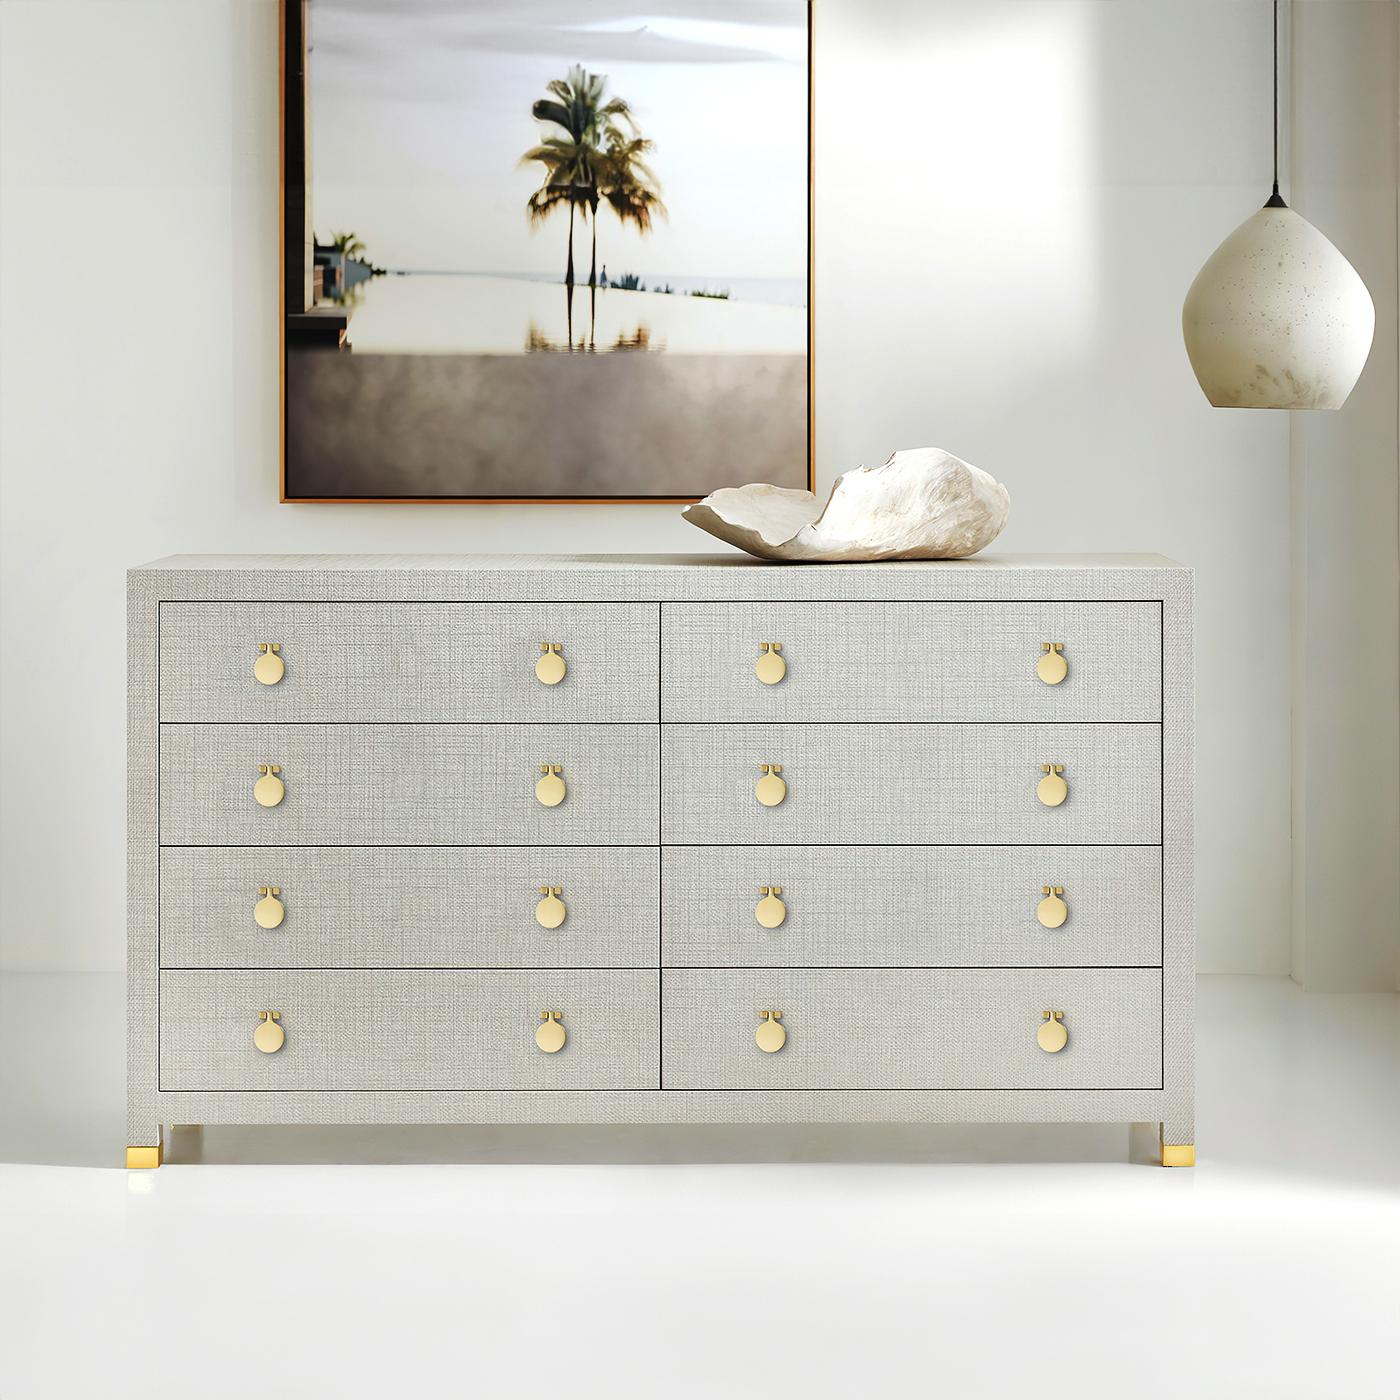 Modern Light Gray Weaved Eight Drawer Dresser. With a light gray weaved vinyl wrapped frame, oak secondary wood drawer construction, soft close drawers, and polished solid brass hardware and feet.

Dimensions: 72